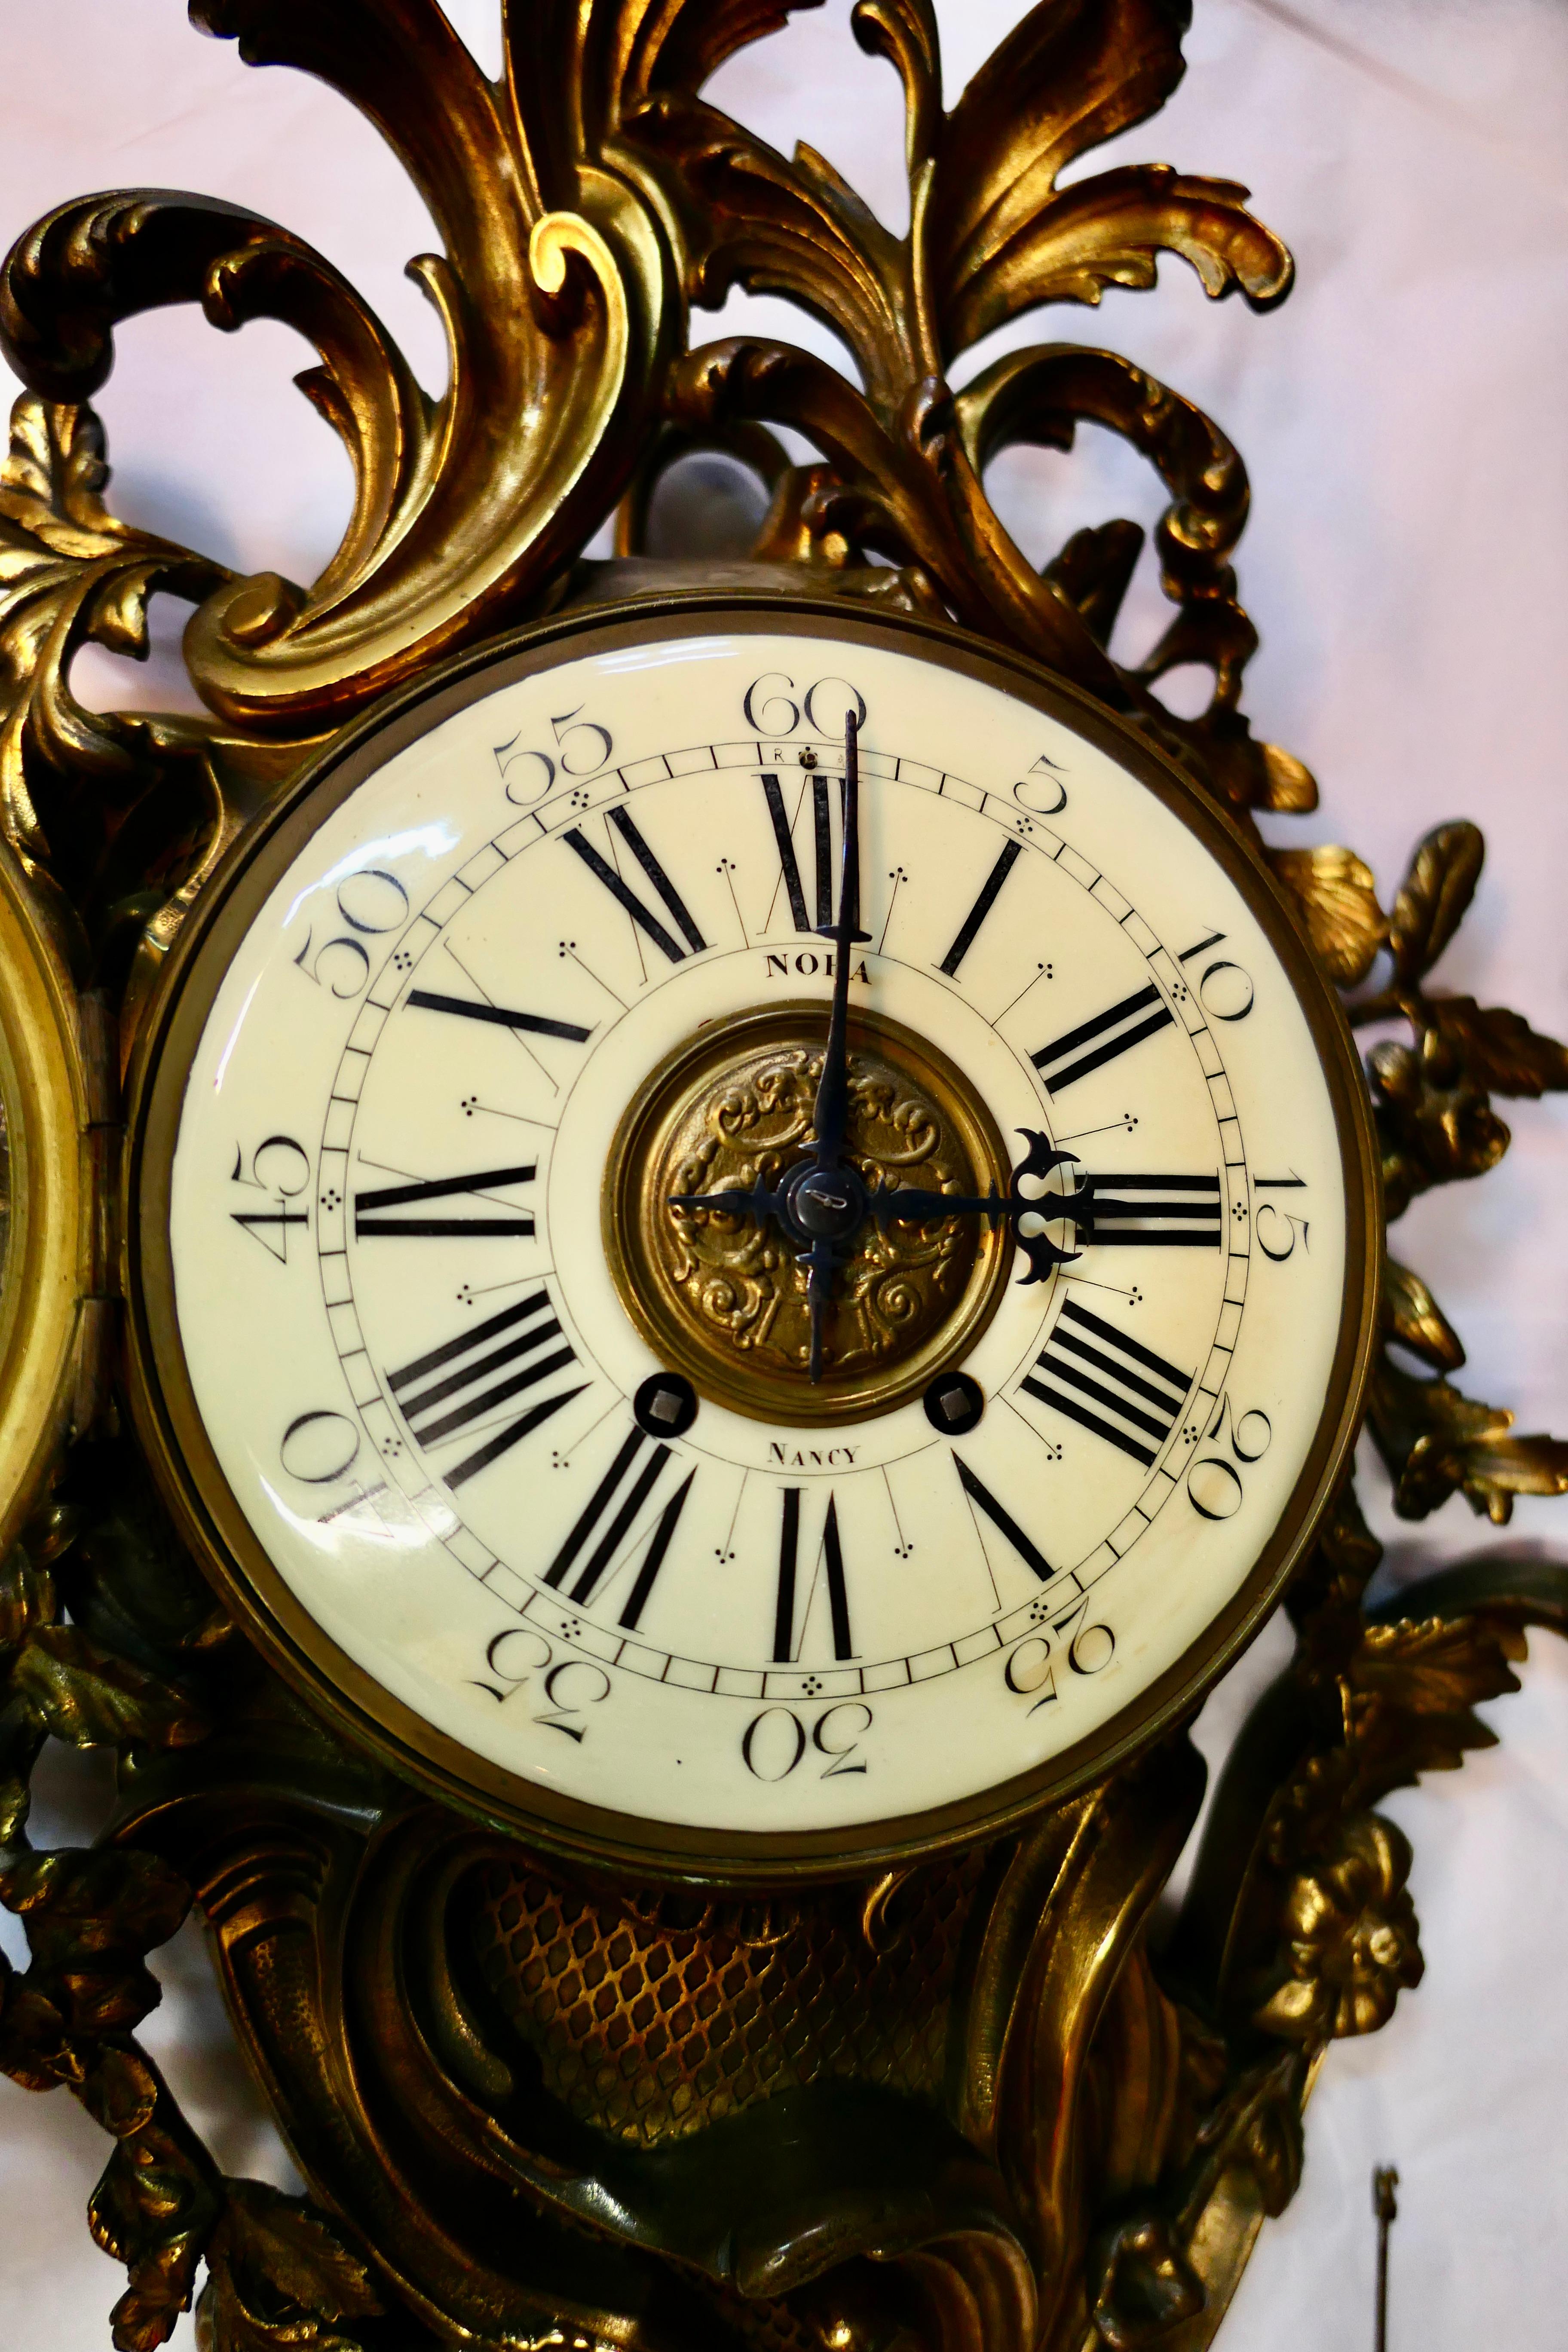 This vintage mid 19th century French Louis XV style cartel (wall) clock is beautifully designed. The dramatic sculpted bronze large clock is decorated with sweeping scrolled leaves & floral vines that dominate its appearance. A cream color enamel